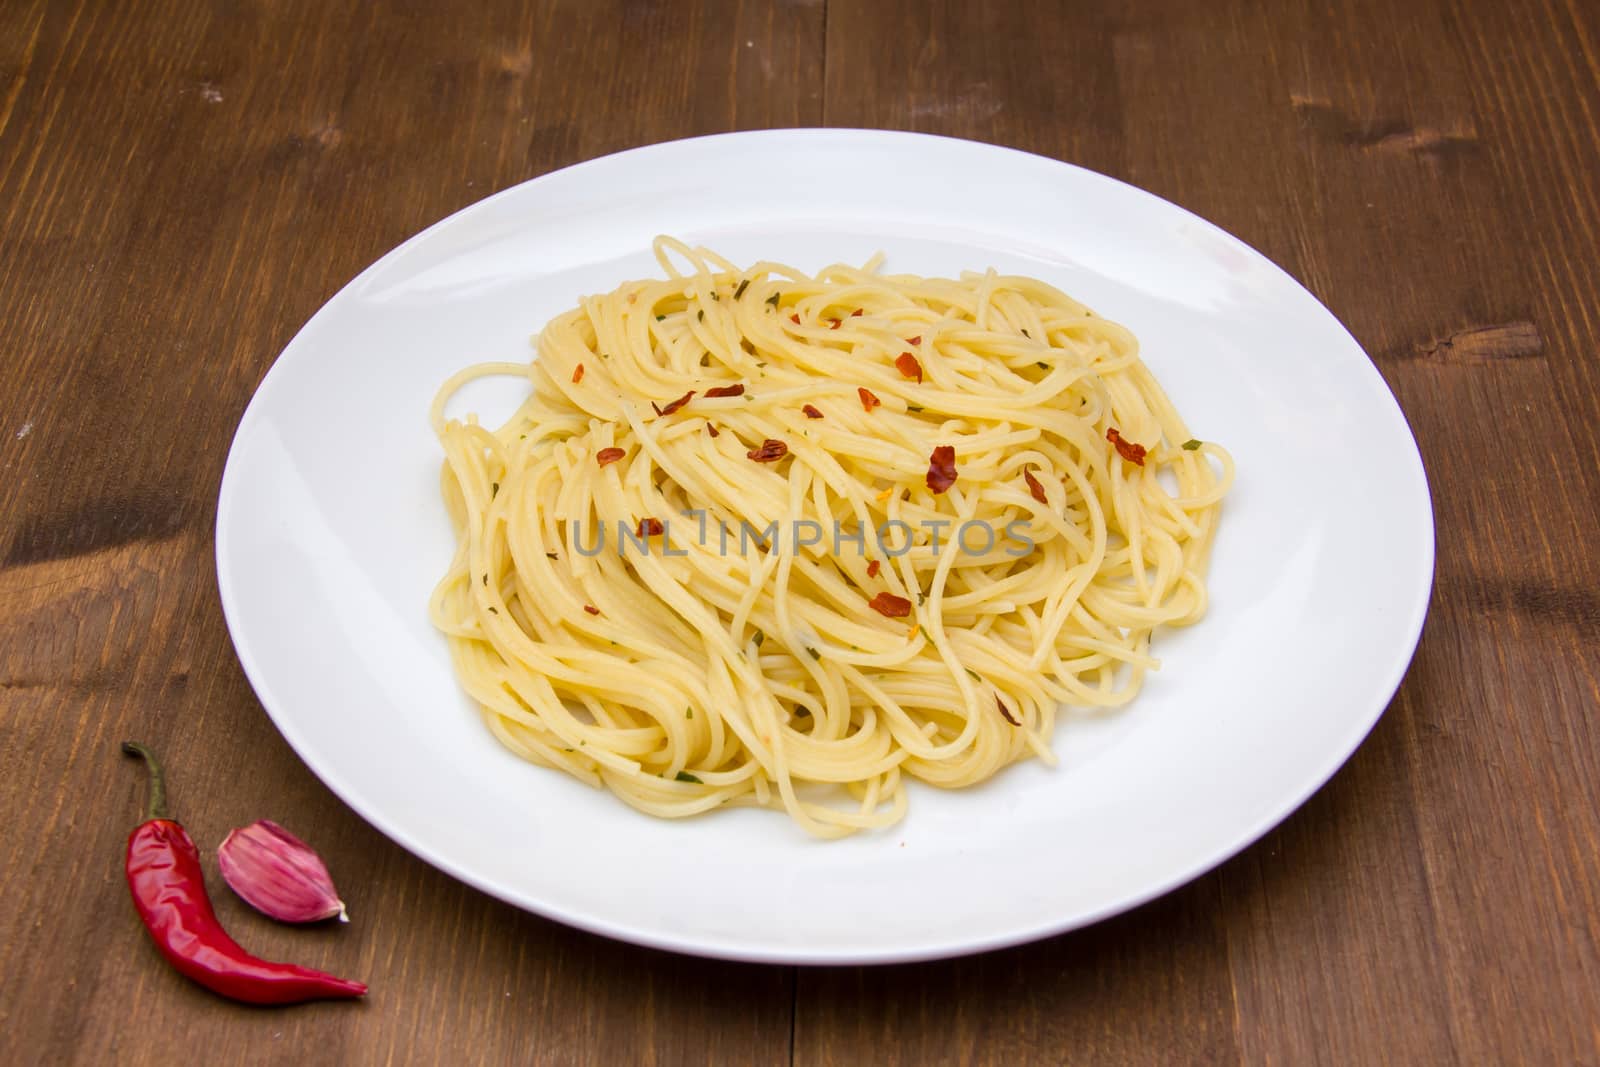 Spaghetti with garlic and chili peppers on wooden table